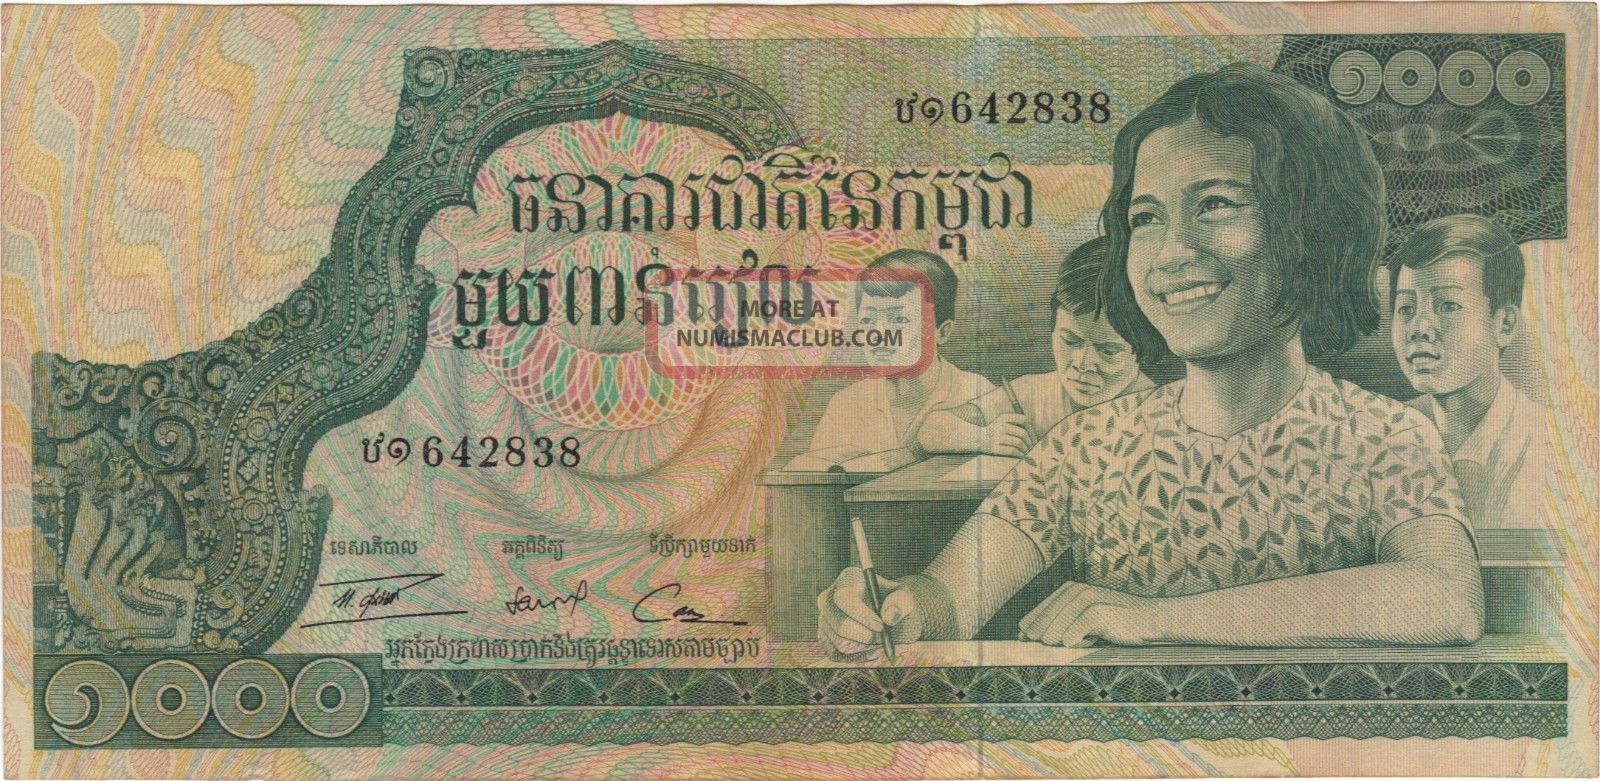 1973 1000 Riels Cambodia Currency Large Banknote Note Money Bank Bill Cash Asia Asia photo